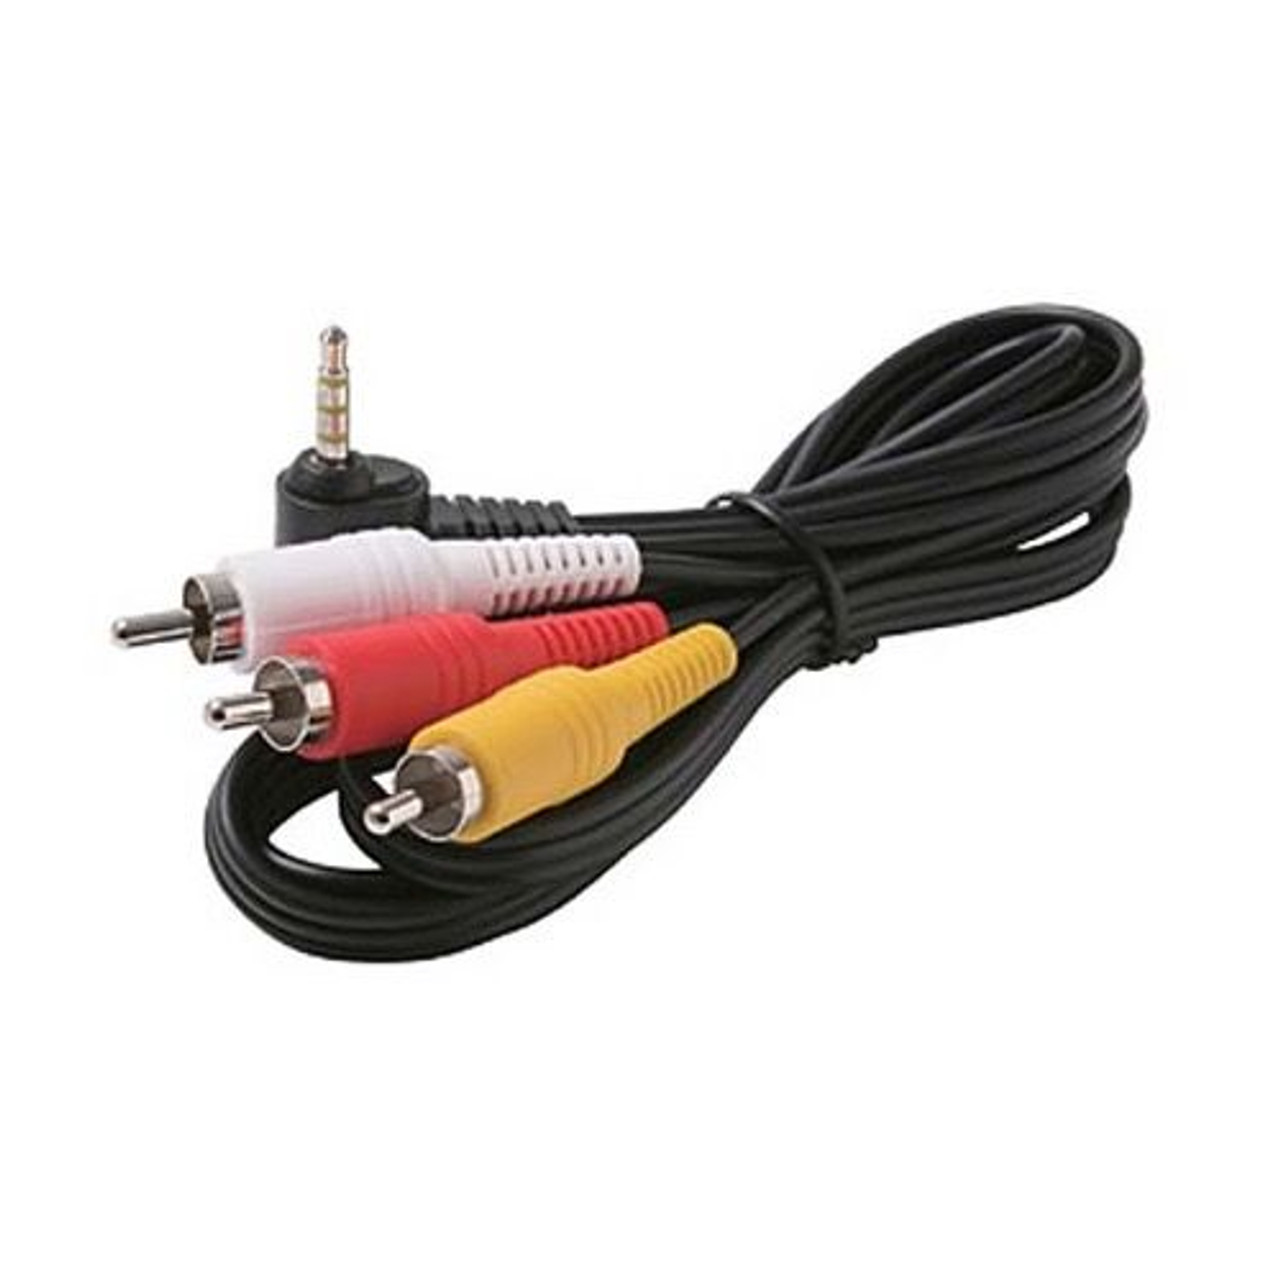 Eagle 6' FT 3.5mm Male to 3 RCA Male Cable Camcorder Audio Video Stereo Mini Phone A/V RYW Audio Video Cord Cable Shielded Triple RCA Male Cable to 3.5 mm Male Plug Connector